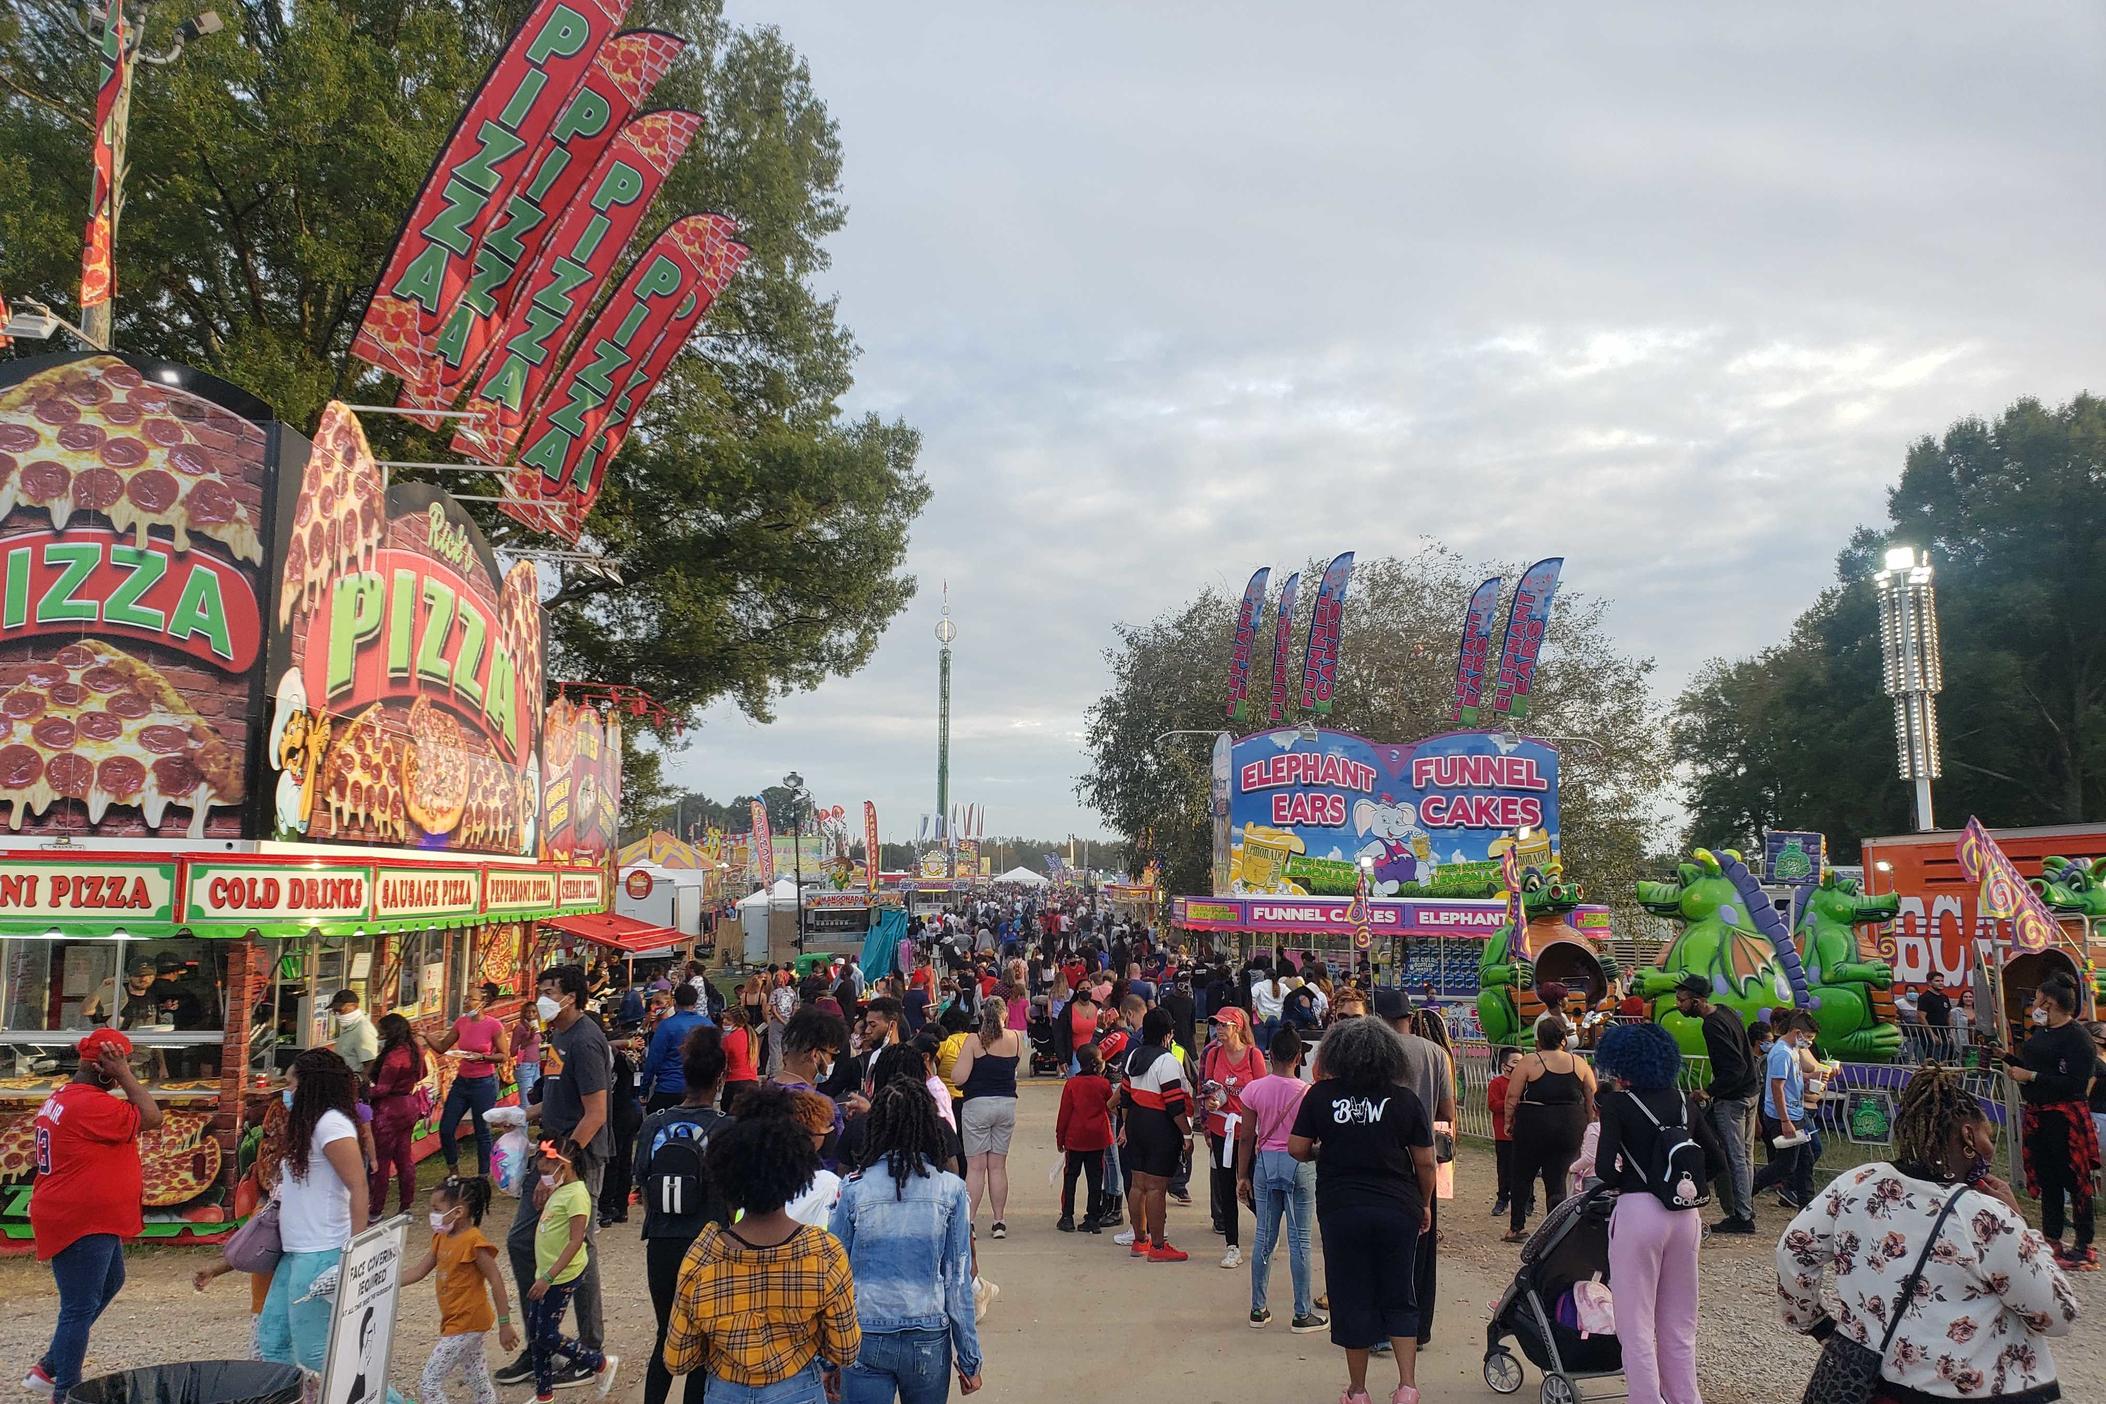 Crowds attend the 2020 Georgia State Fair at the Atlanta Motor Speedway.